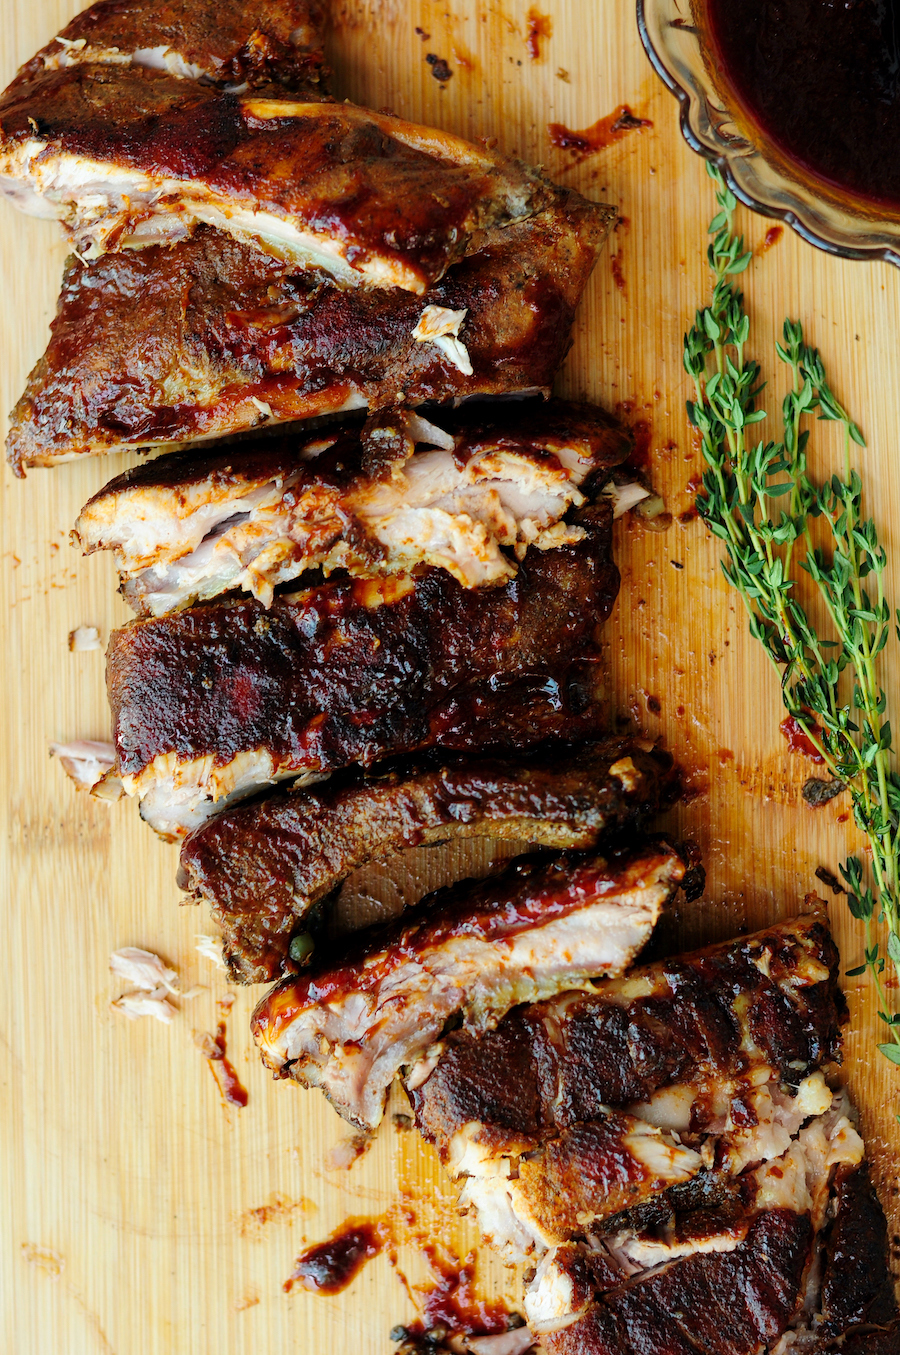 https://www.streetsmartkitchen.com/wp-content/uploads/Sous-Vide-Baby-Back-Ribs-with-Honey-Spiced-BBQ-Sauce.jpg